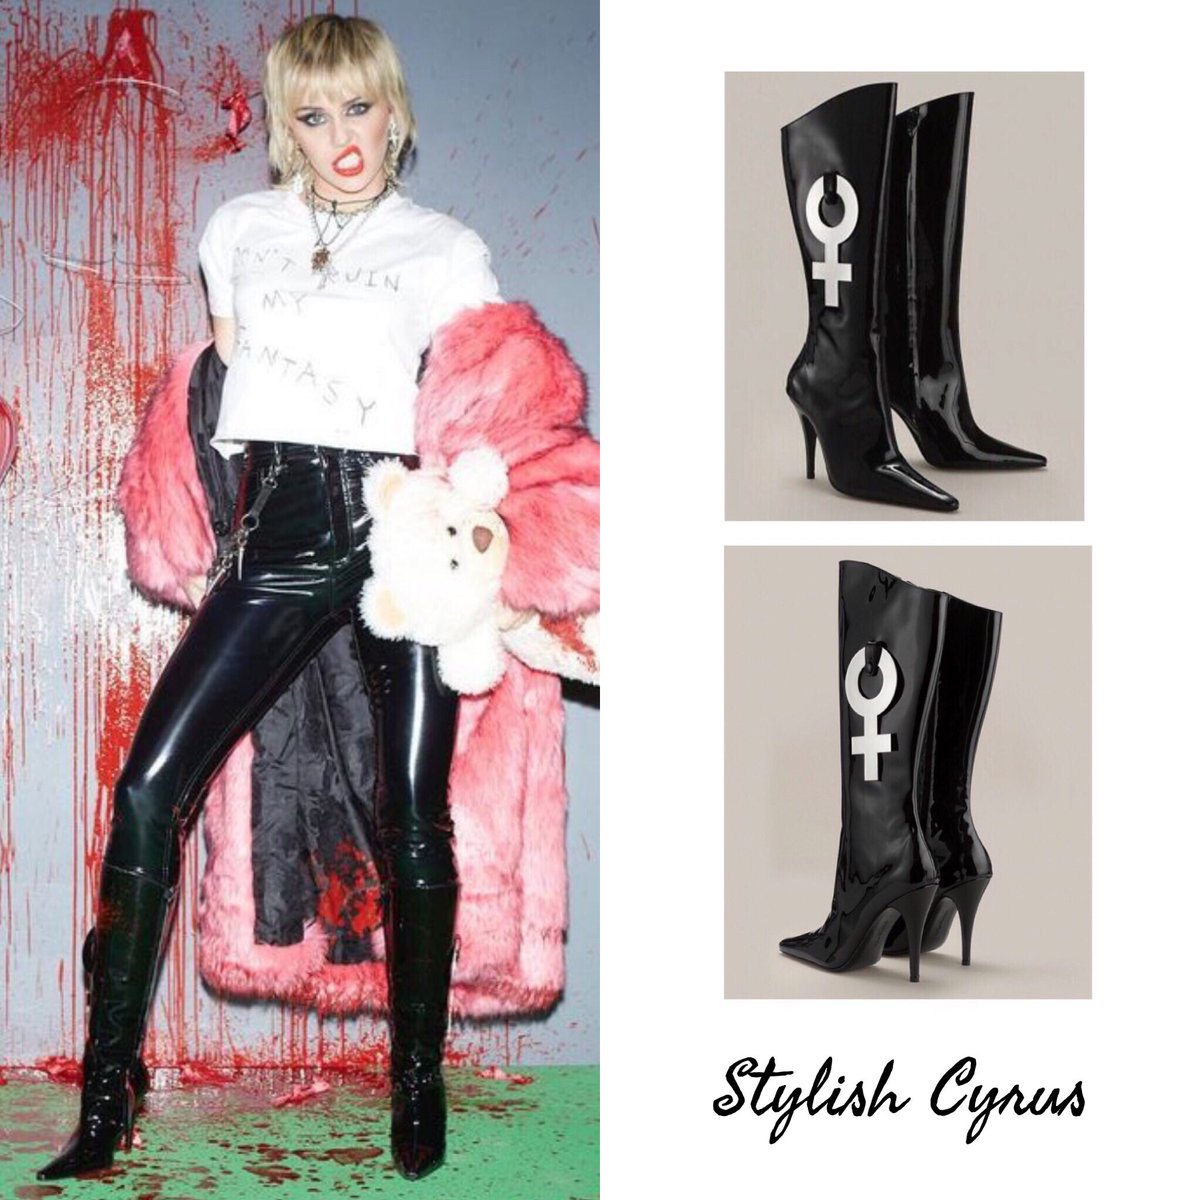 Miley Cyrus Fashion on X: was able ID these super fierce boots @mileycyrus wore in her Tik Tok Watermarked the other day! MC wears Agent Provocateur's 'Monike' Patent